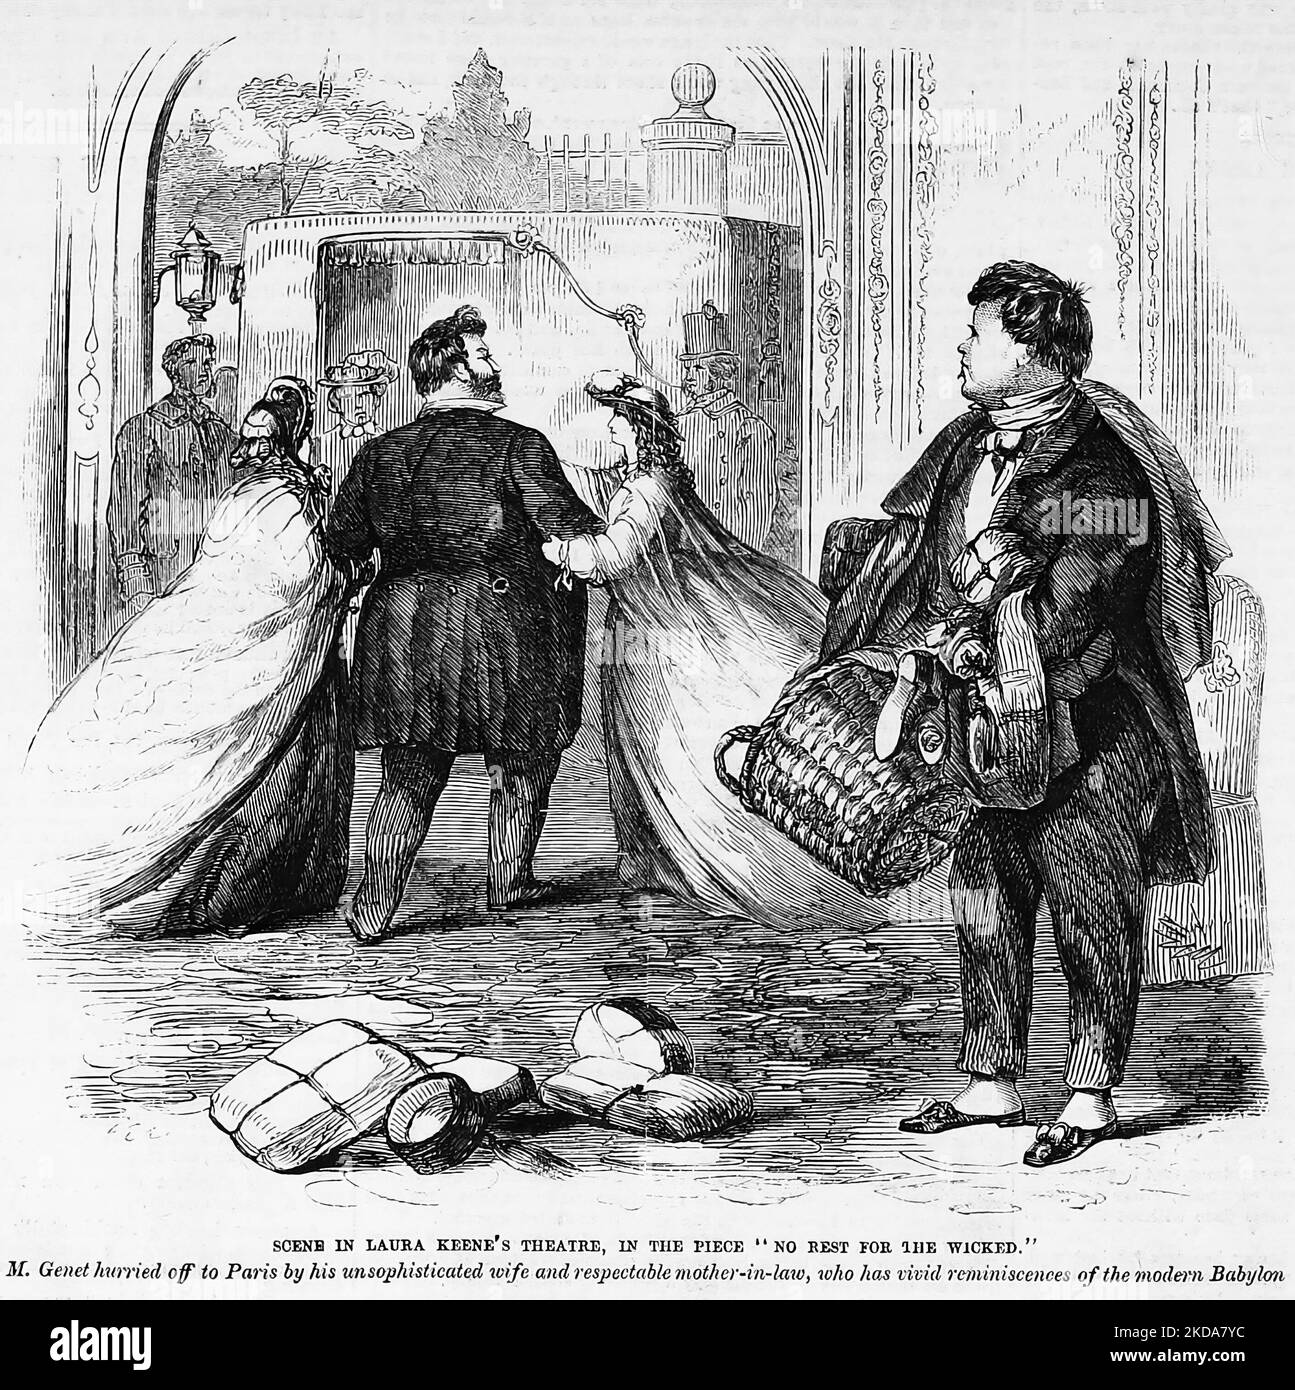 Scene in Laura Keene's Theatre, in the piece 'No Rest for the Wicked.' Broadway, New York City. November 1862. 19th century illustration from Frank Leslie's Illustrated Newspaper Stock Photo